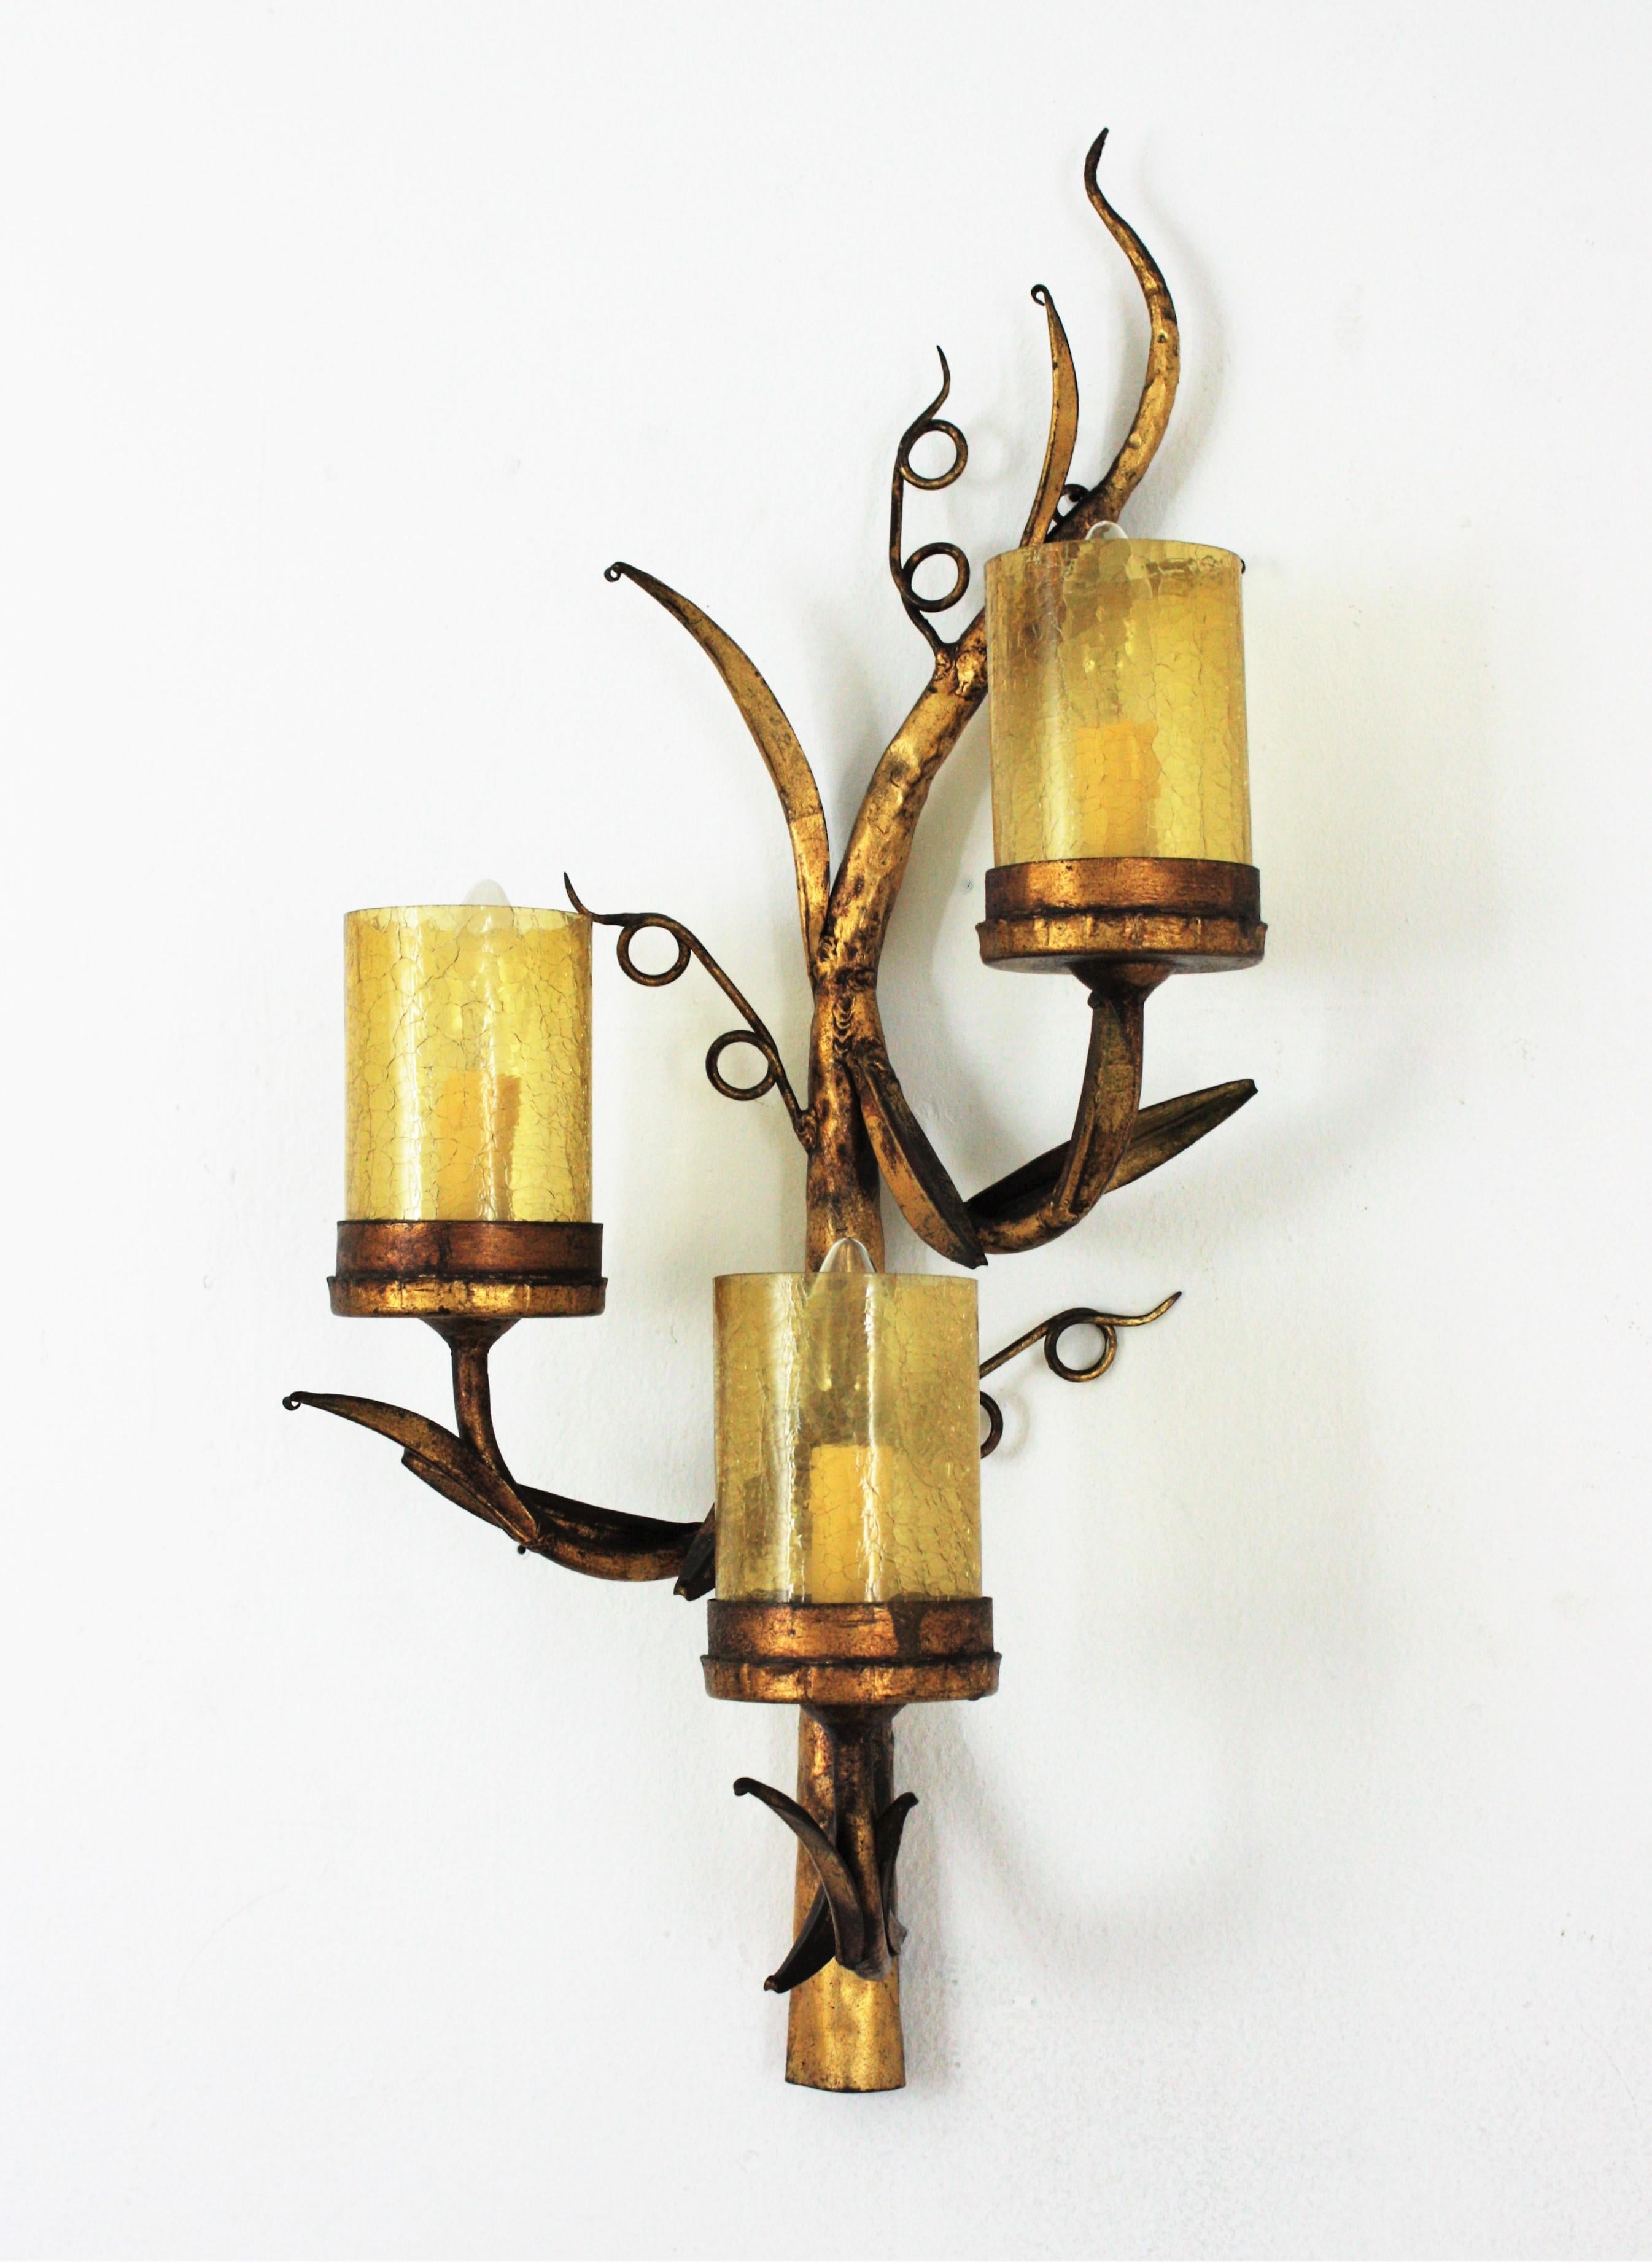 Spanish Branch Wall Sconce in Gilt Iron and Amber Cracked Glass, 1950s For Sale 1